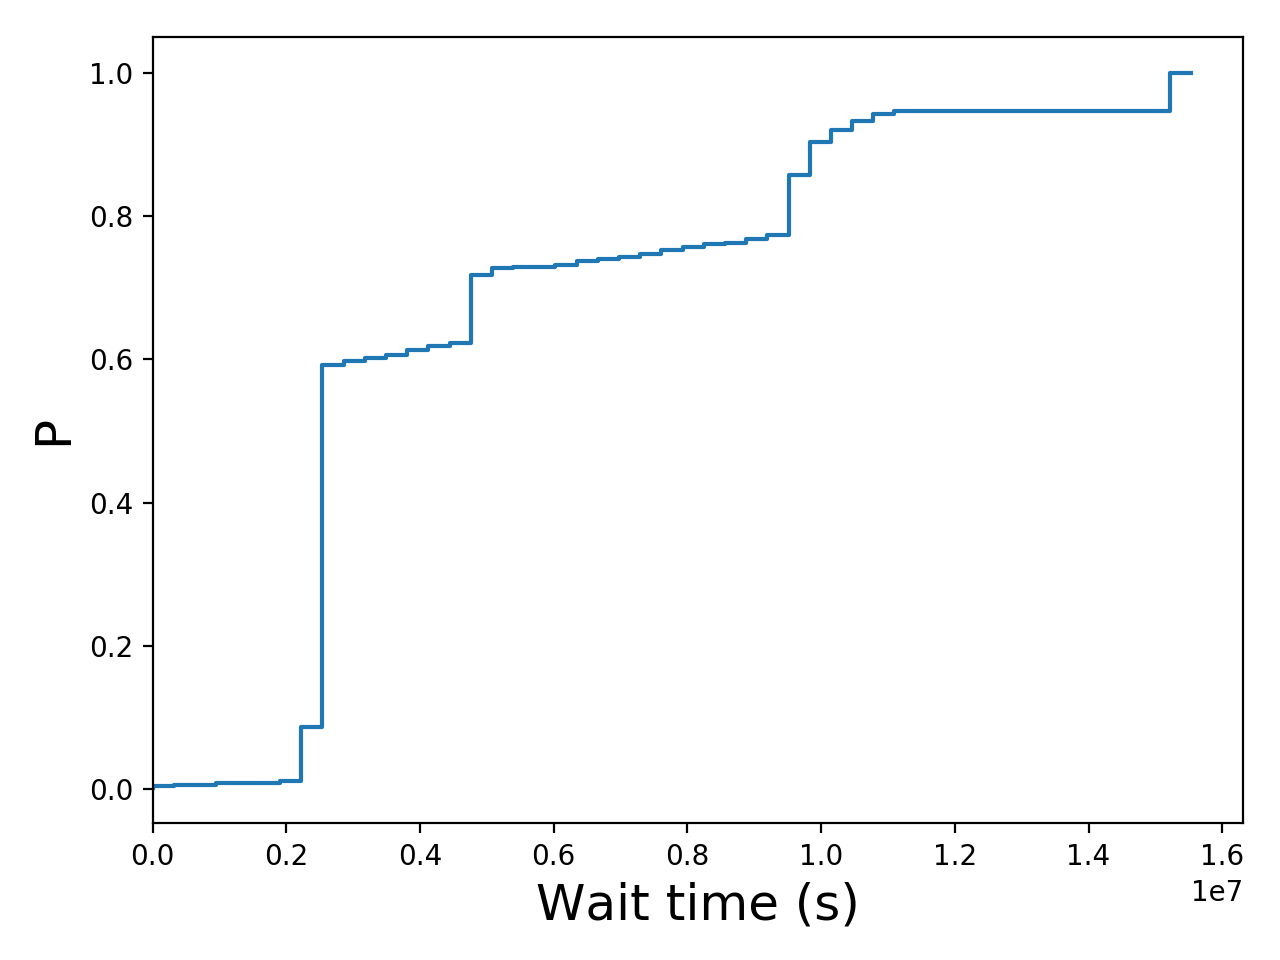 Task wait time CDF graph for the Pegasus_P2 trace.